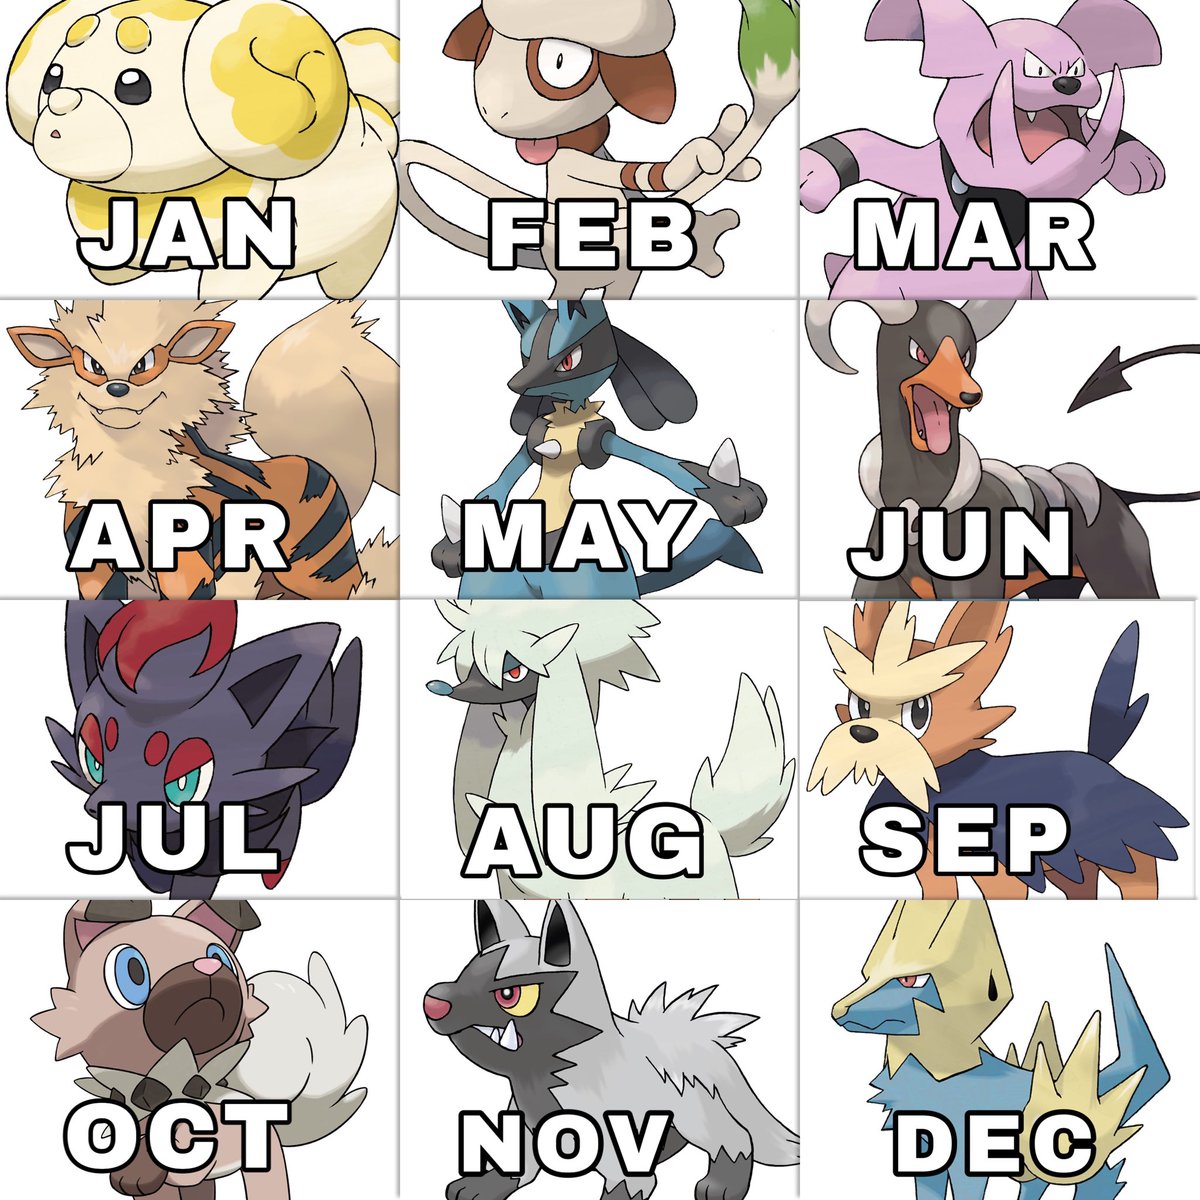 Your birth month is what canine/`dog' Pokemon you are now best friends with: 